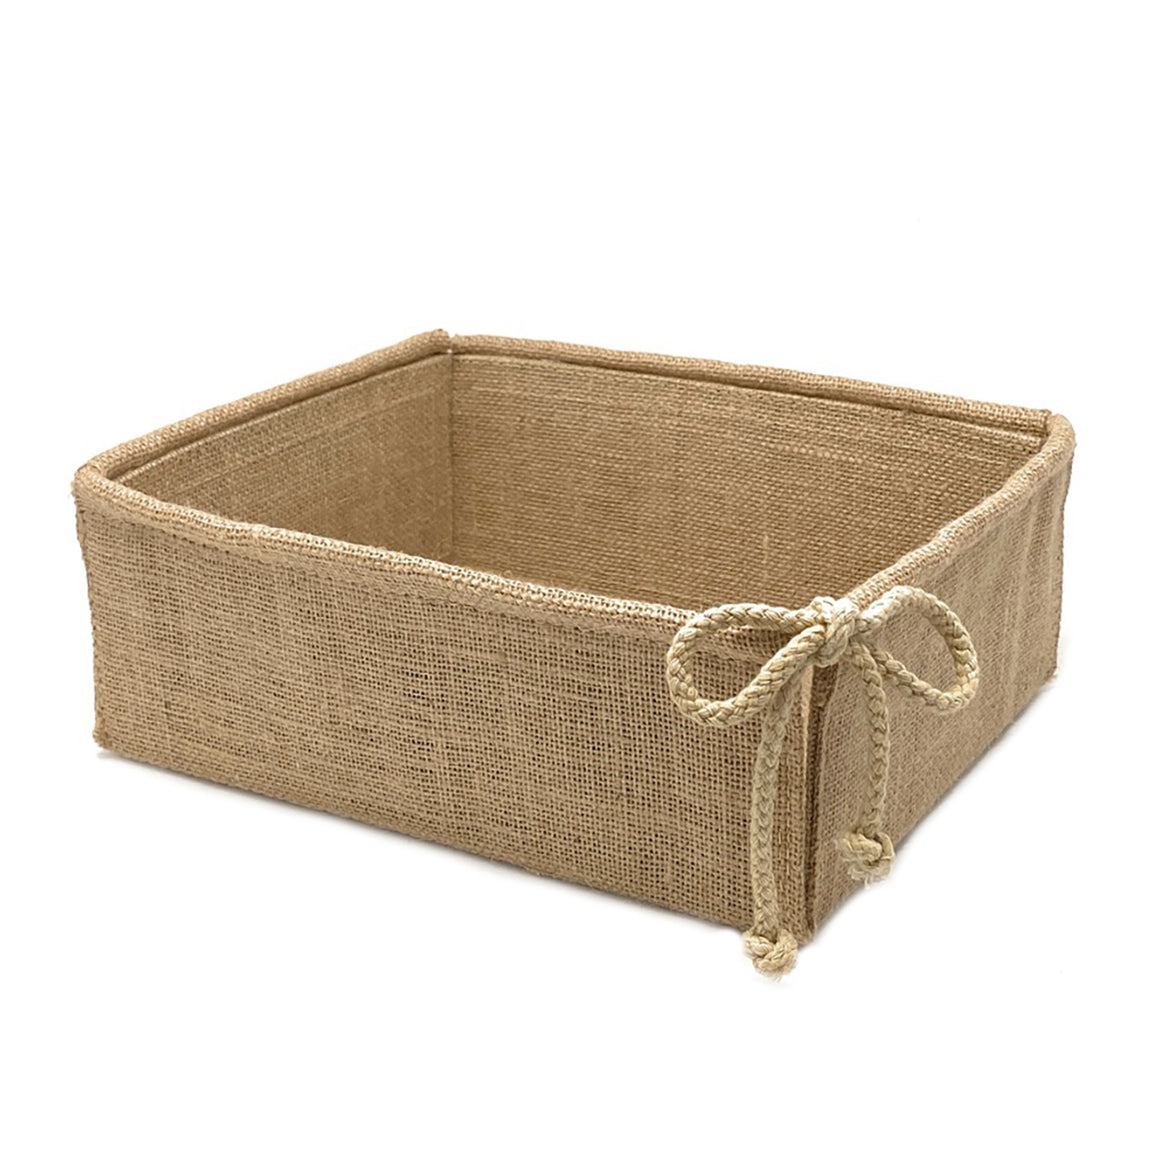 Decorative Burlap Basket Foldable for Gifts and Decor